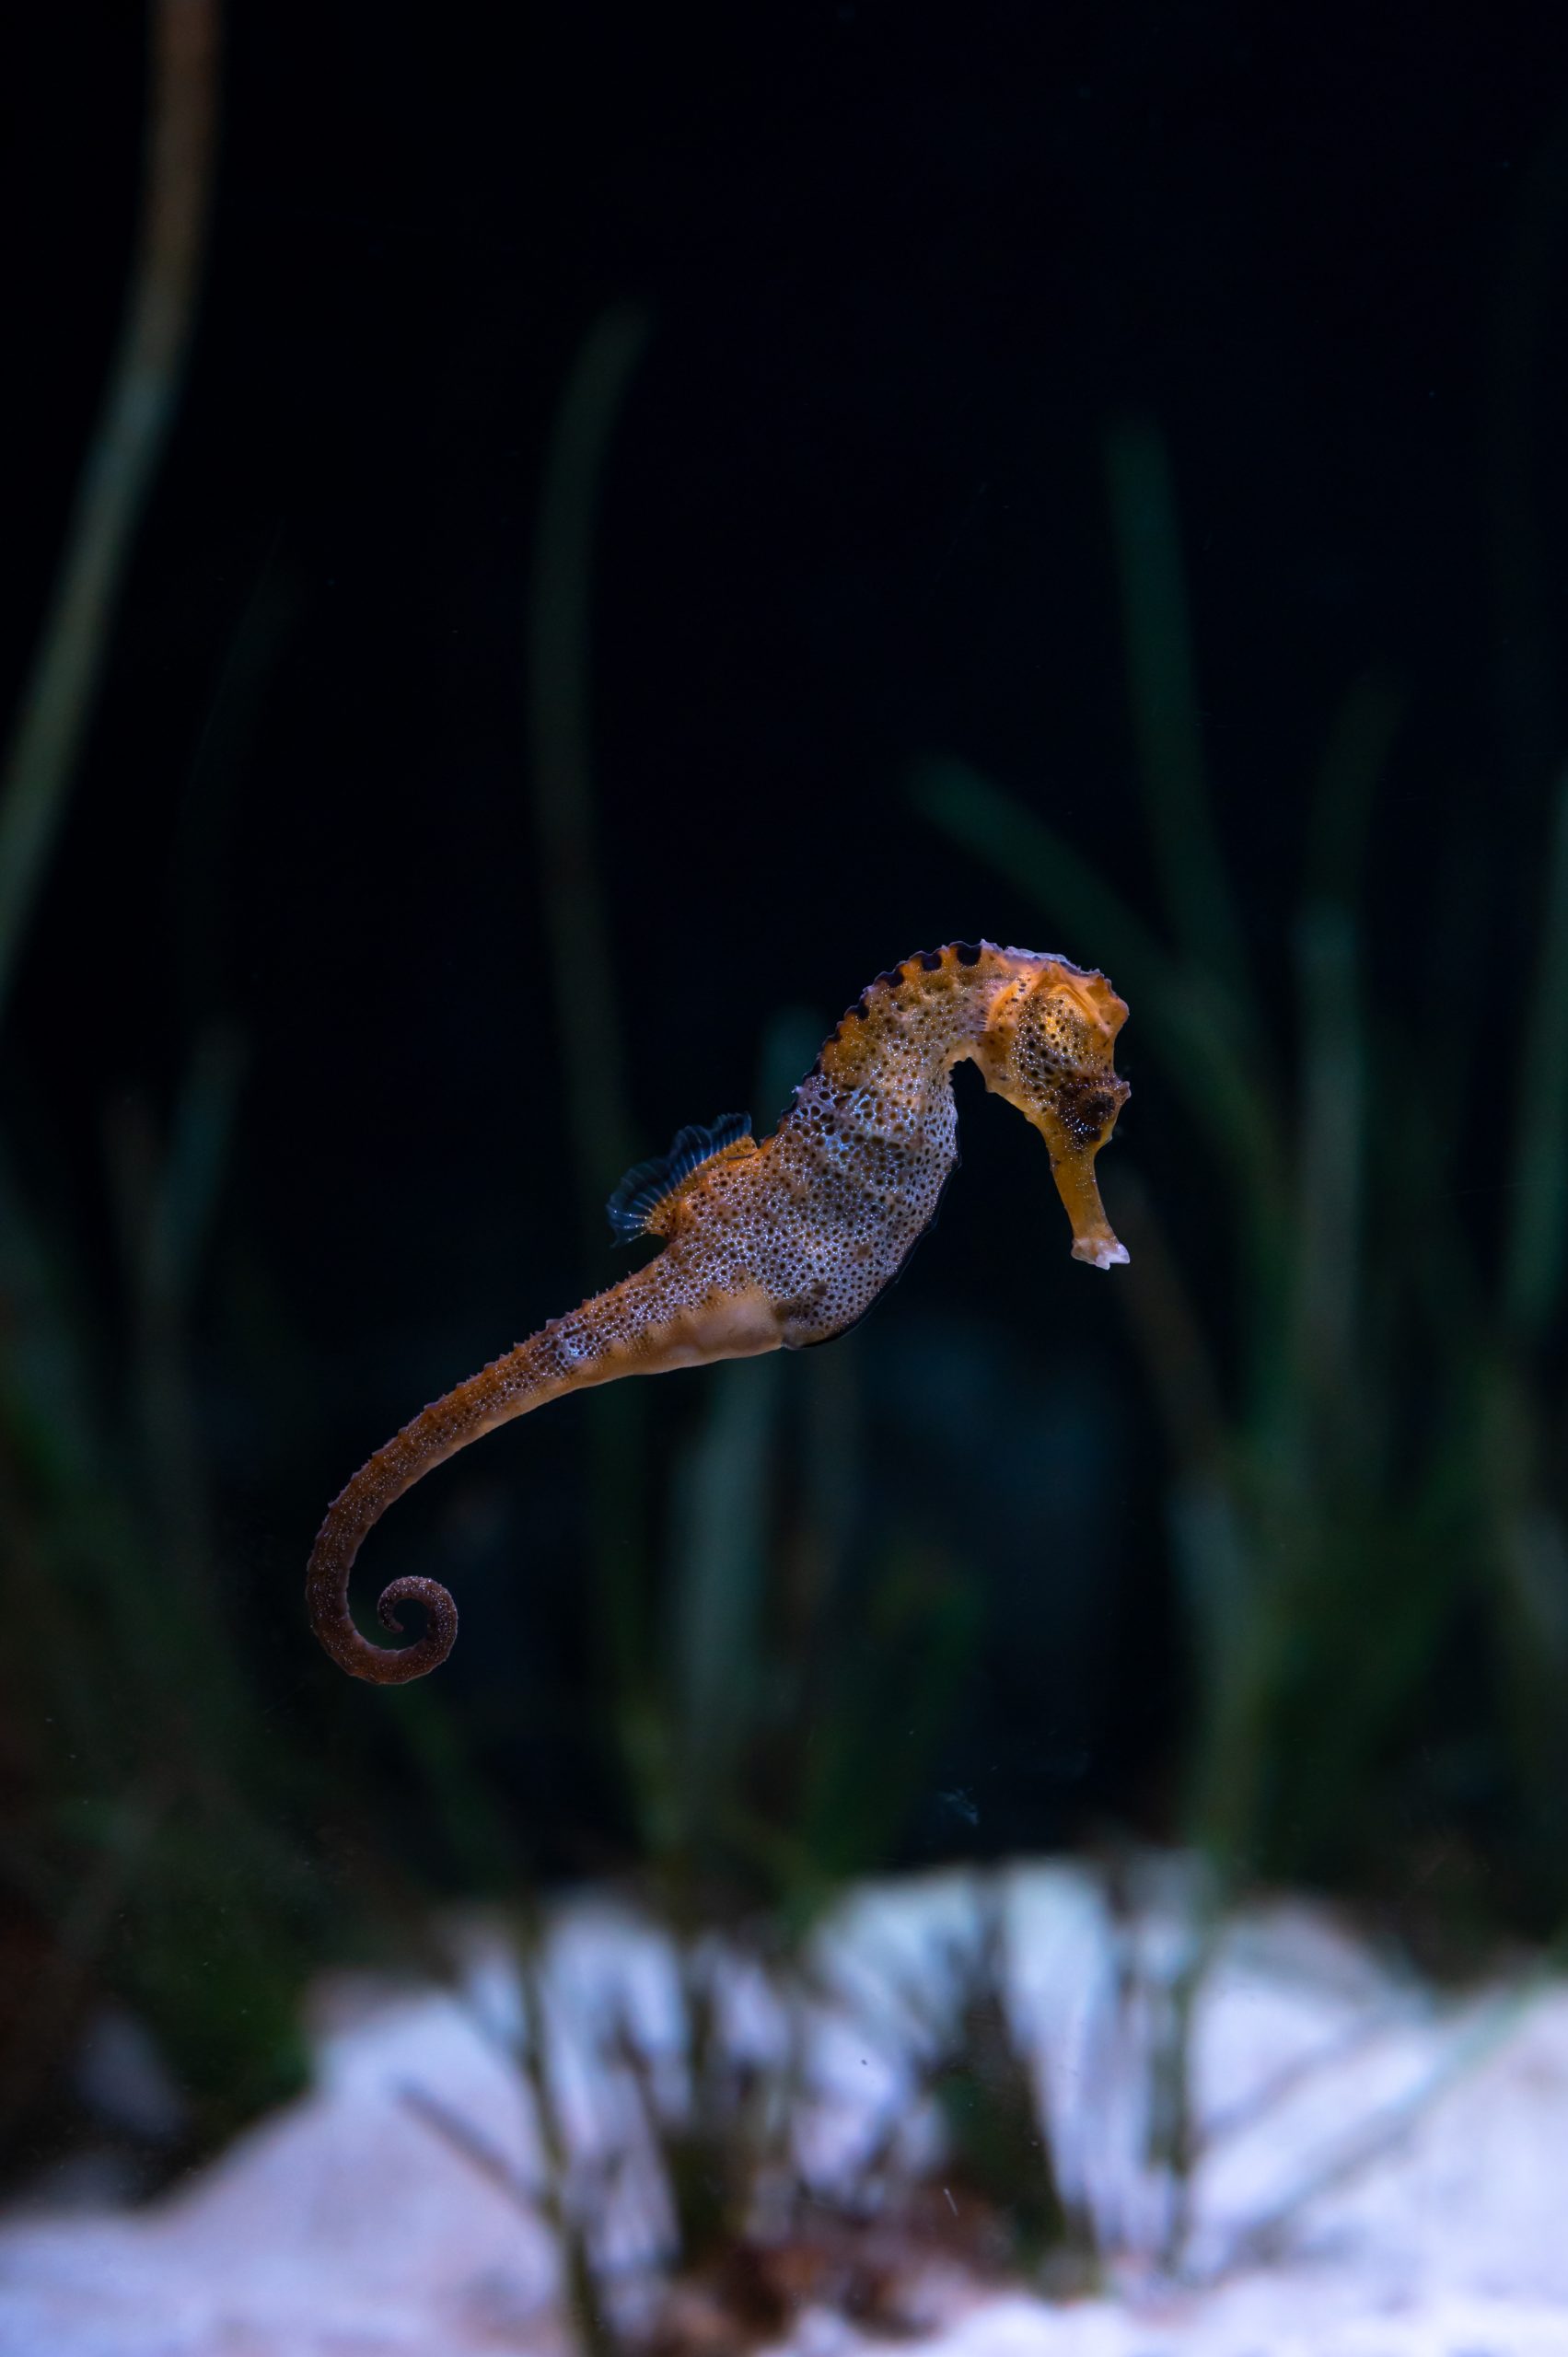 Seahorse or hippocampus (genus Hippocampus), marine fish belonging to the Syngnathidae family swimming with marine vegetation behind